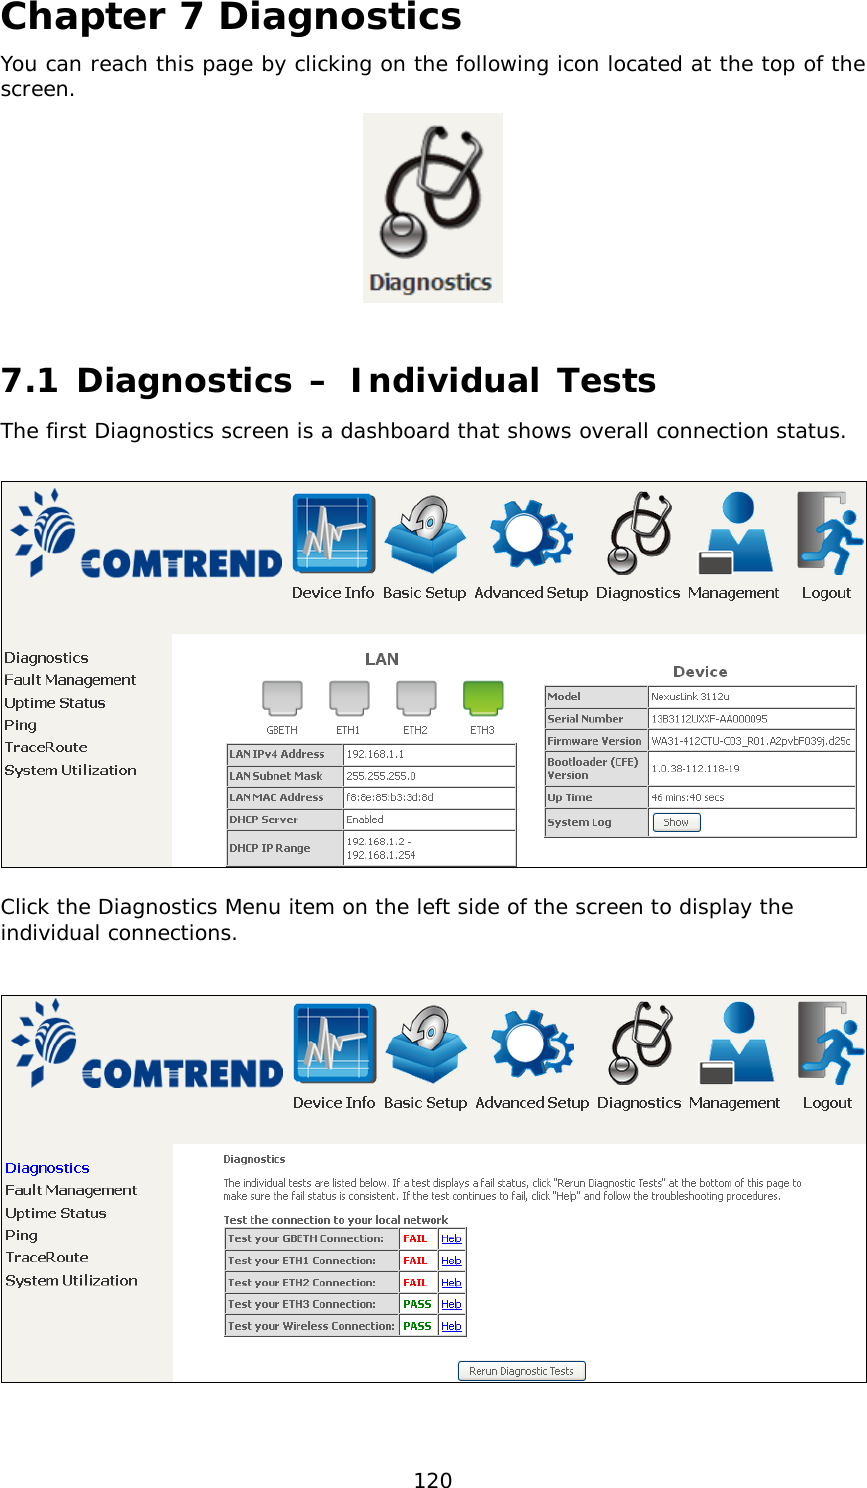  120 Chapter 7 Diagnostics You can reach this page by clicking on the following icon located at the top of the screen.  7.1 Diagnostics – Individual Tests The first Diagnostics screen is a dashboard that shows overall connection status.     Click the Diagnostics Menu item on the left side of the screen to display the individual connections.      